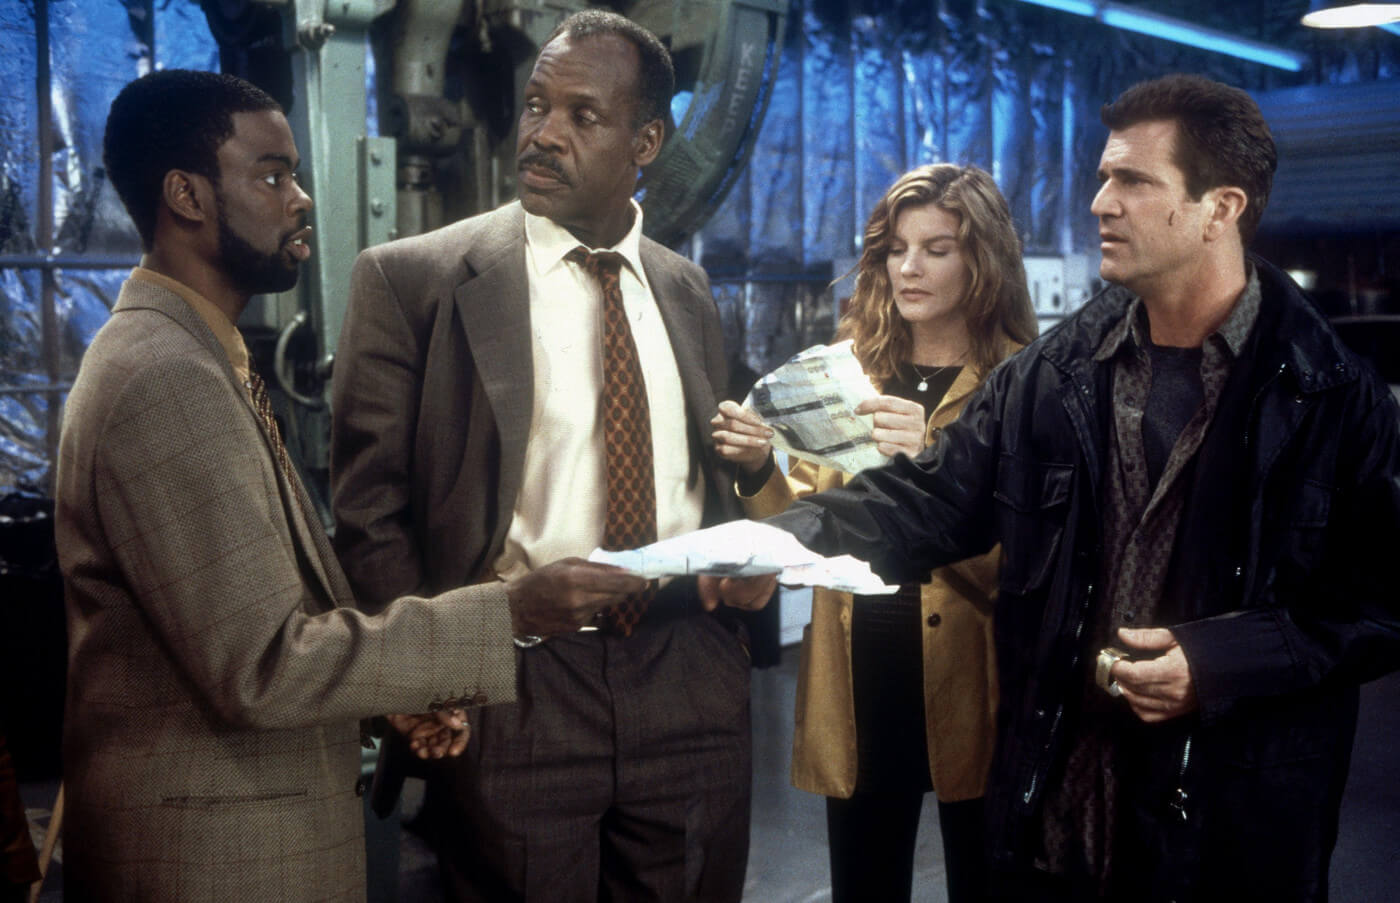 Ranking the Lethal Weapon Film Series 20220511 - Lethal Weapon 4 20